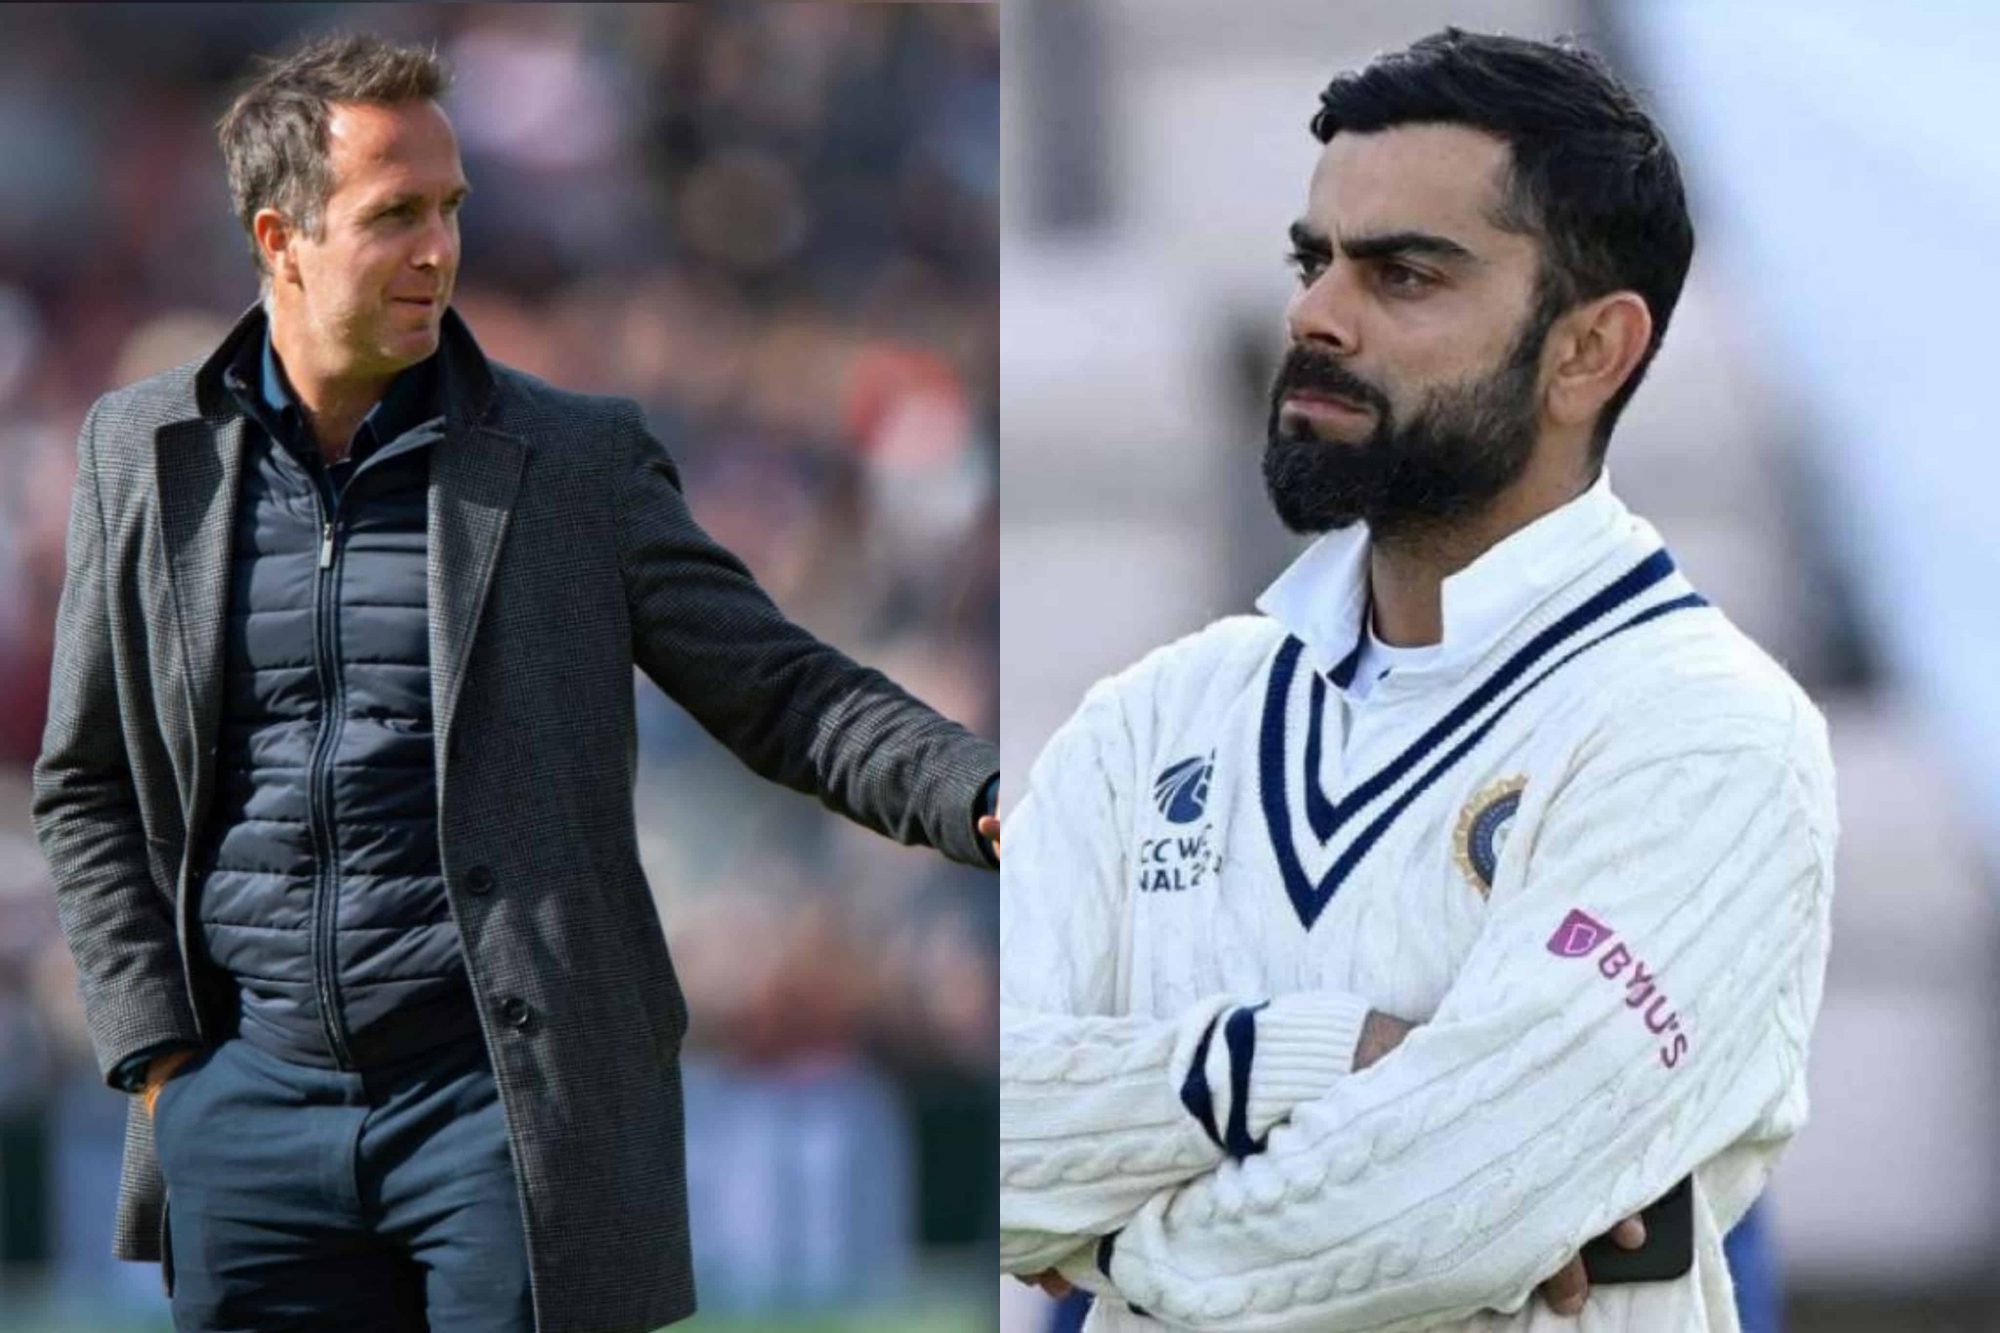 If India Can’t Win This England Side, They Should Go Home: Michael Vaughan